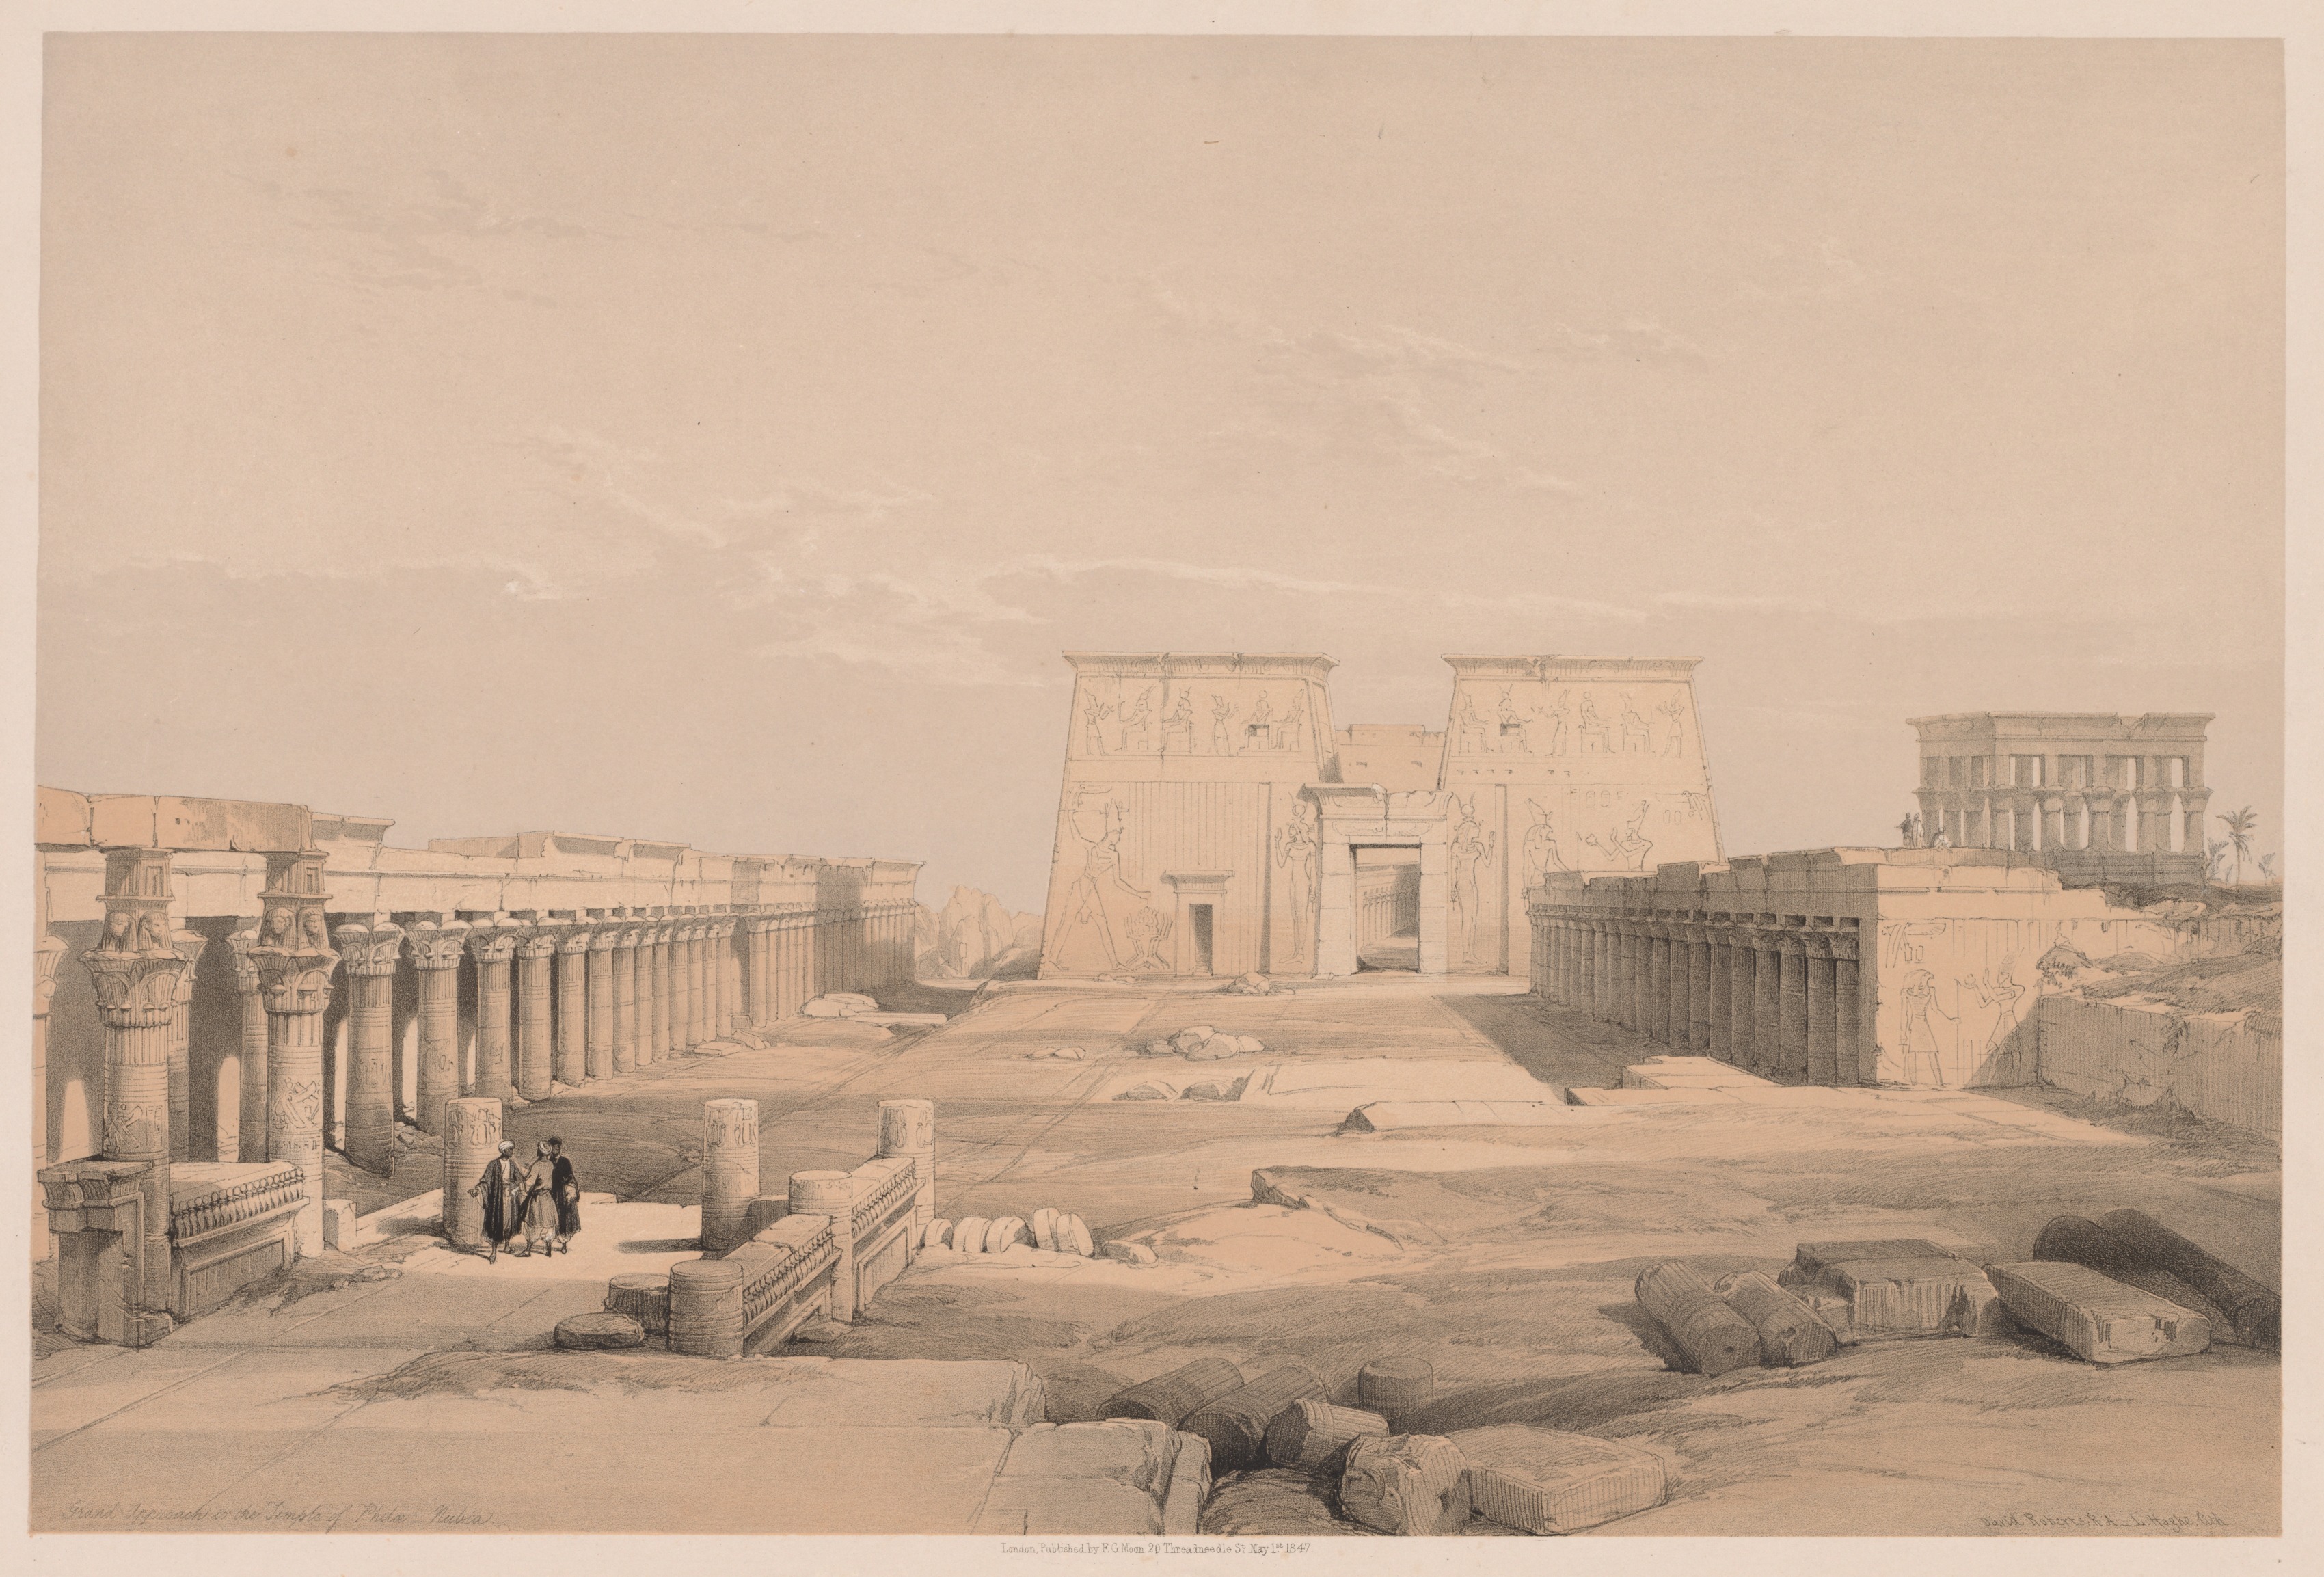 Egypt and Nubia:  Volume I - No. 42, Grand Approach to the Temple of Philae, Nubia